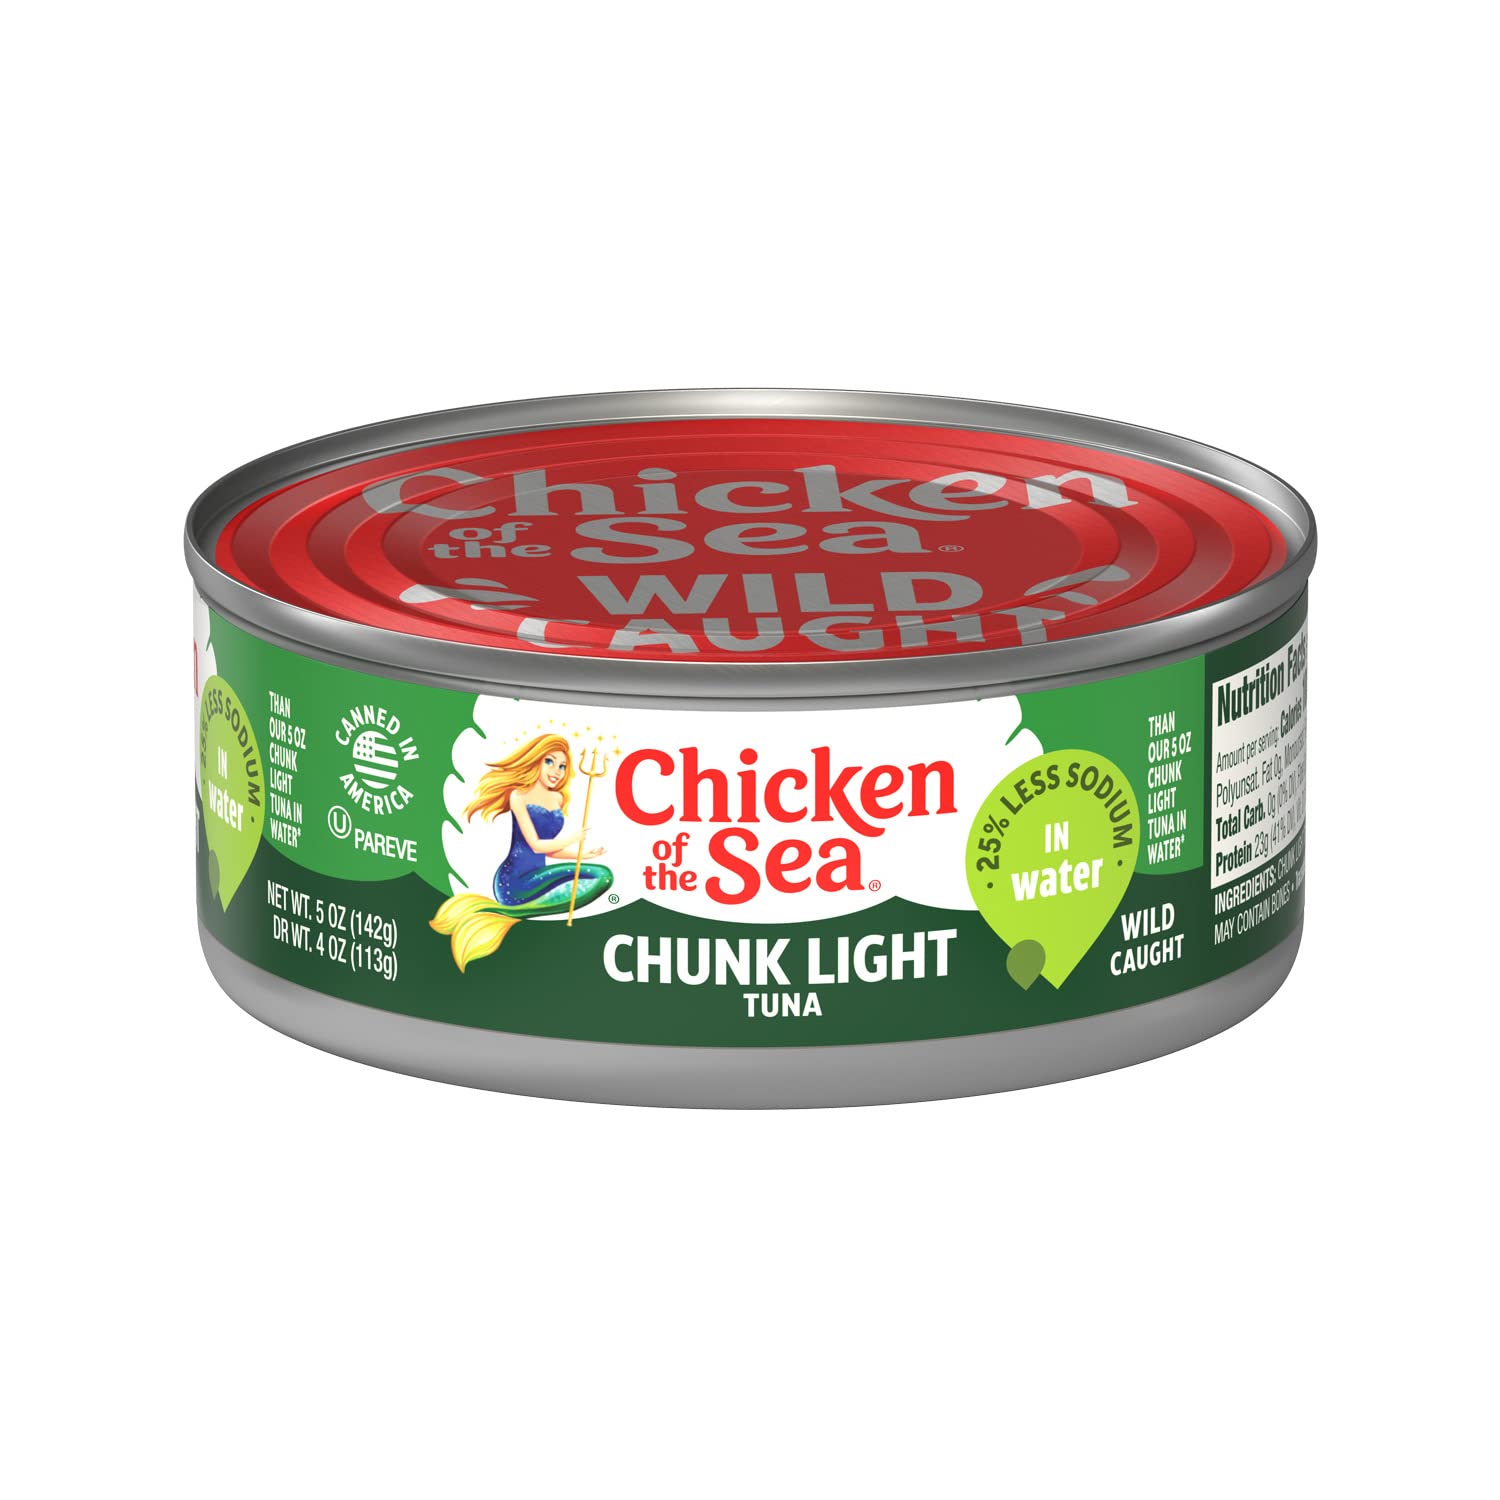 Chicken of the Sea Chunk Light Tuna in Water, Wild Caught Tuna, 25% Less Sodium, 5-Ounce Can (Pack of 1)